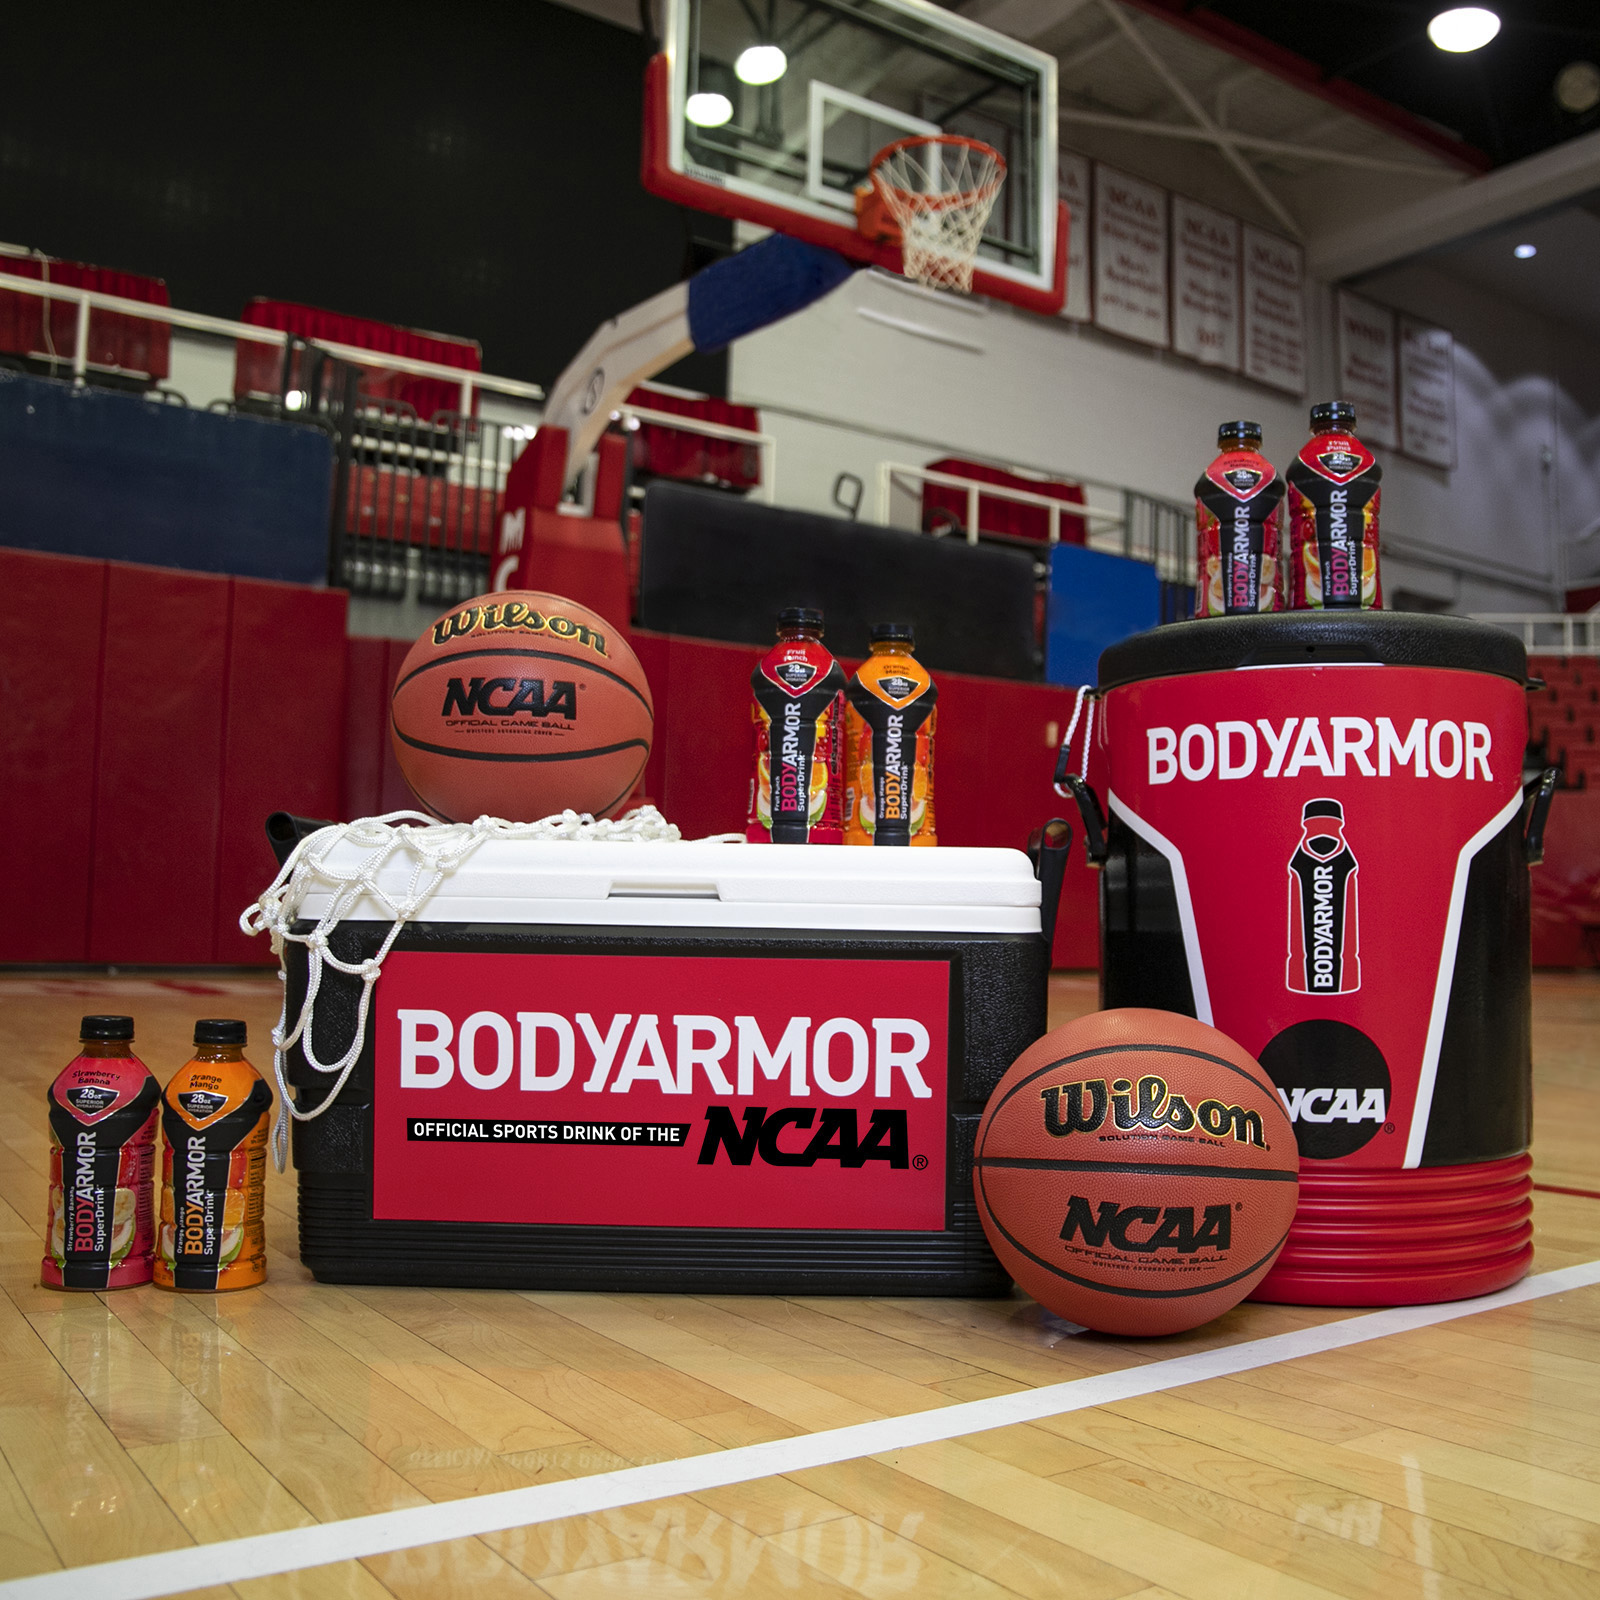 BodyArmor replaces Powerade as NCAA championships sports drink